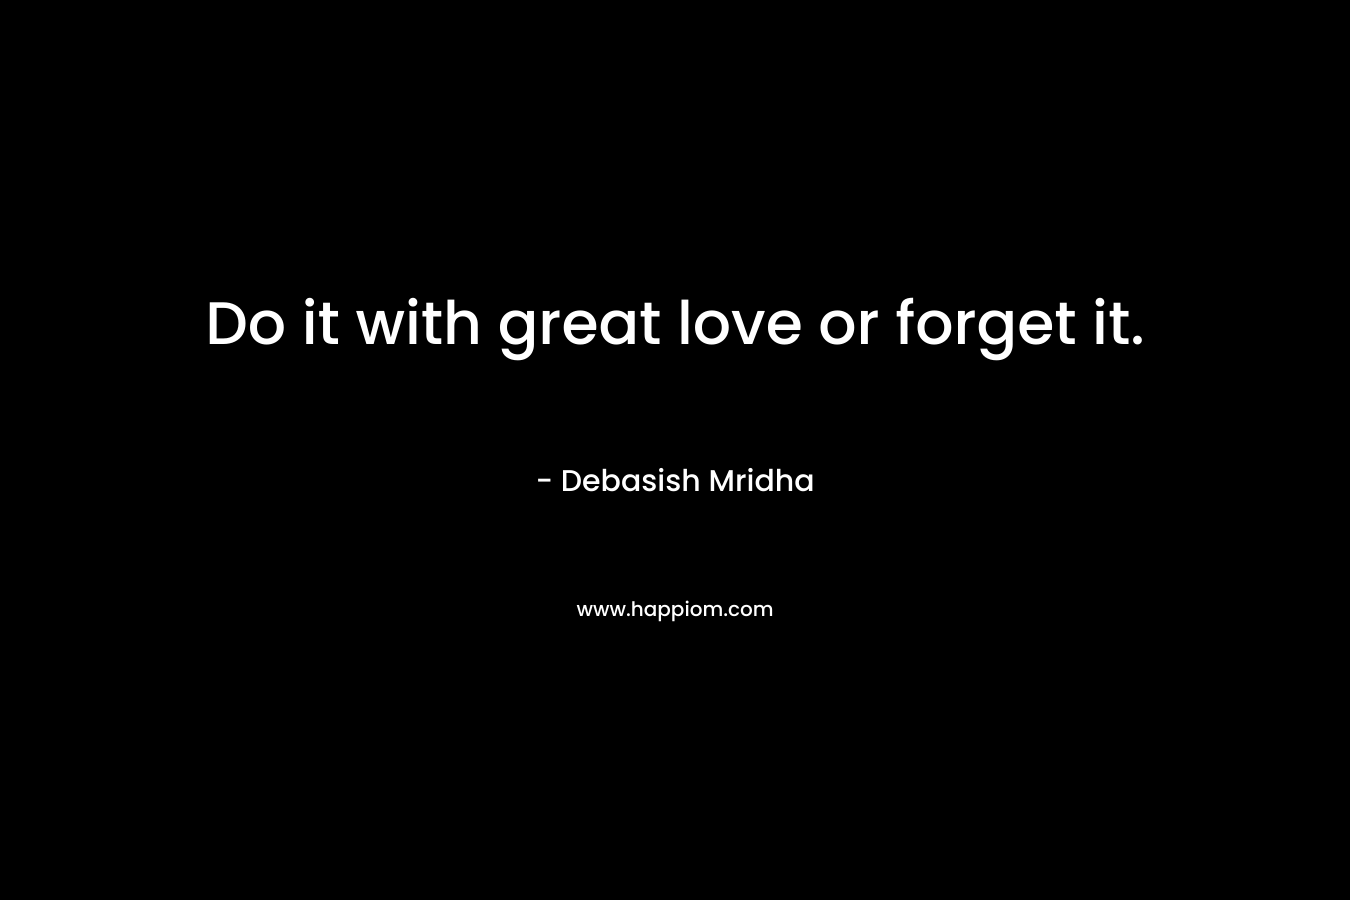 Do it with great love or forget it.